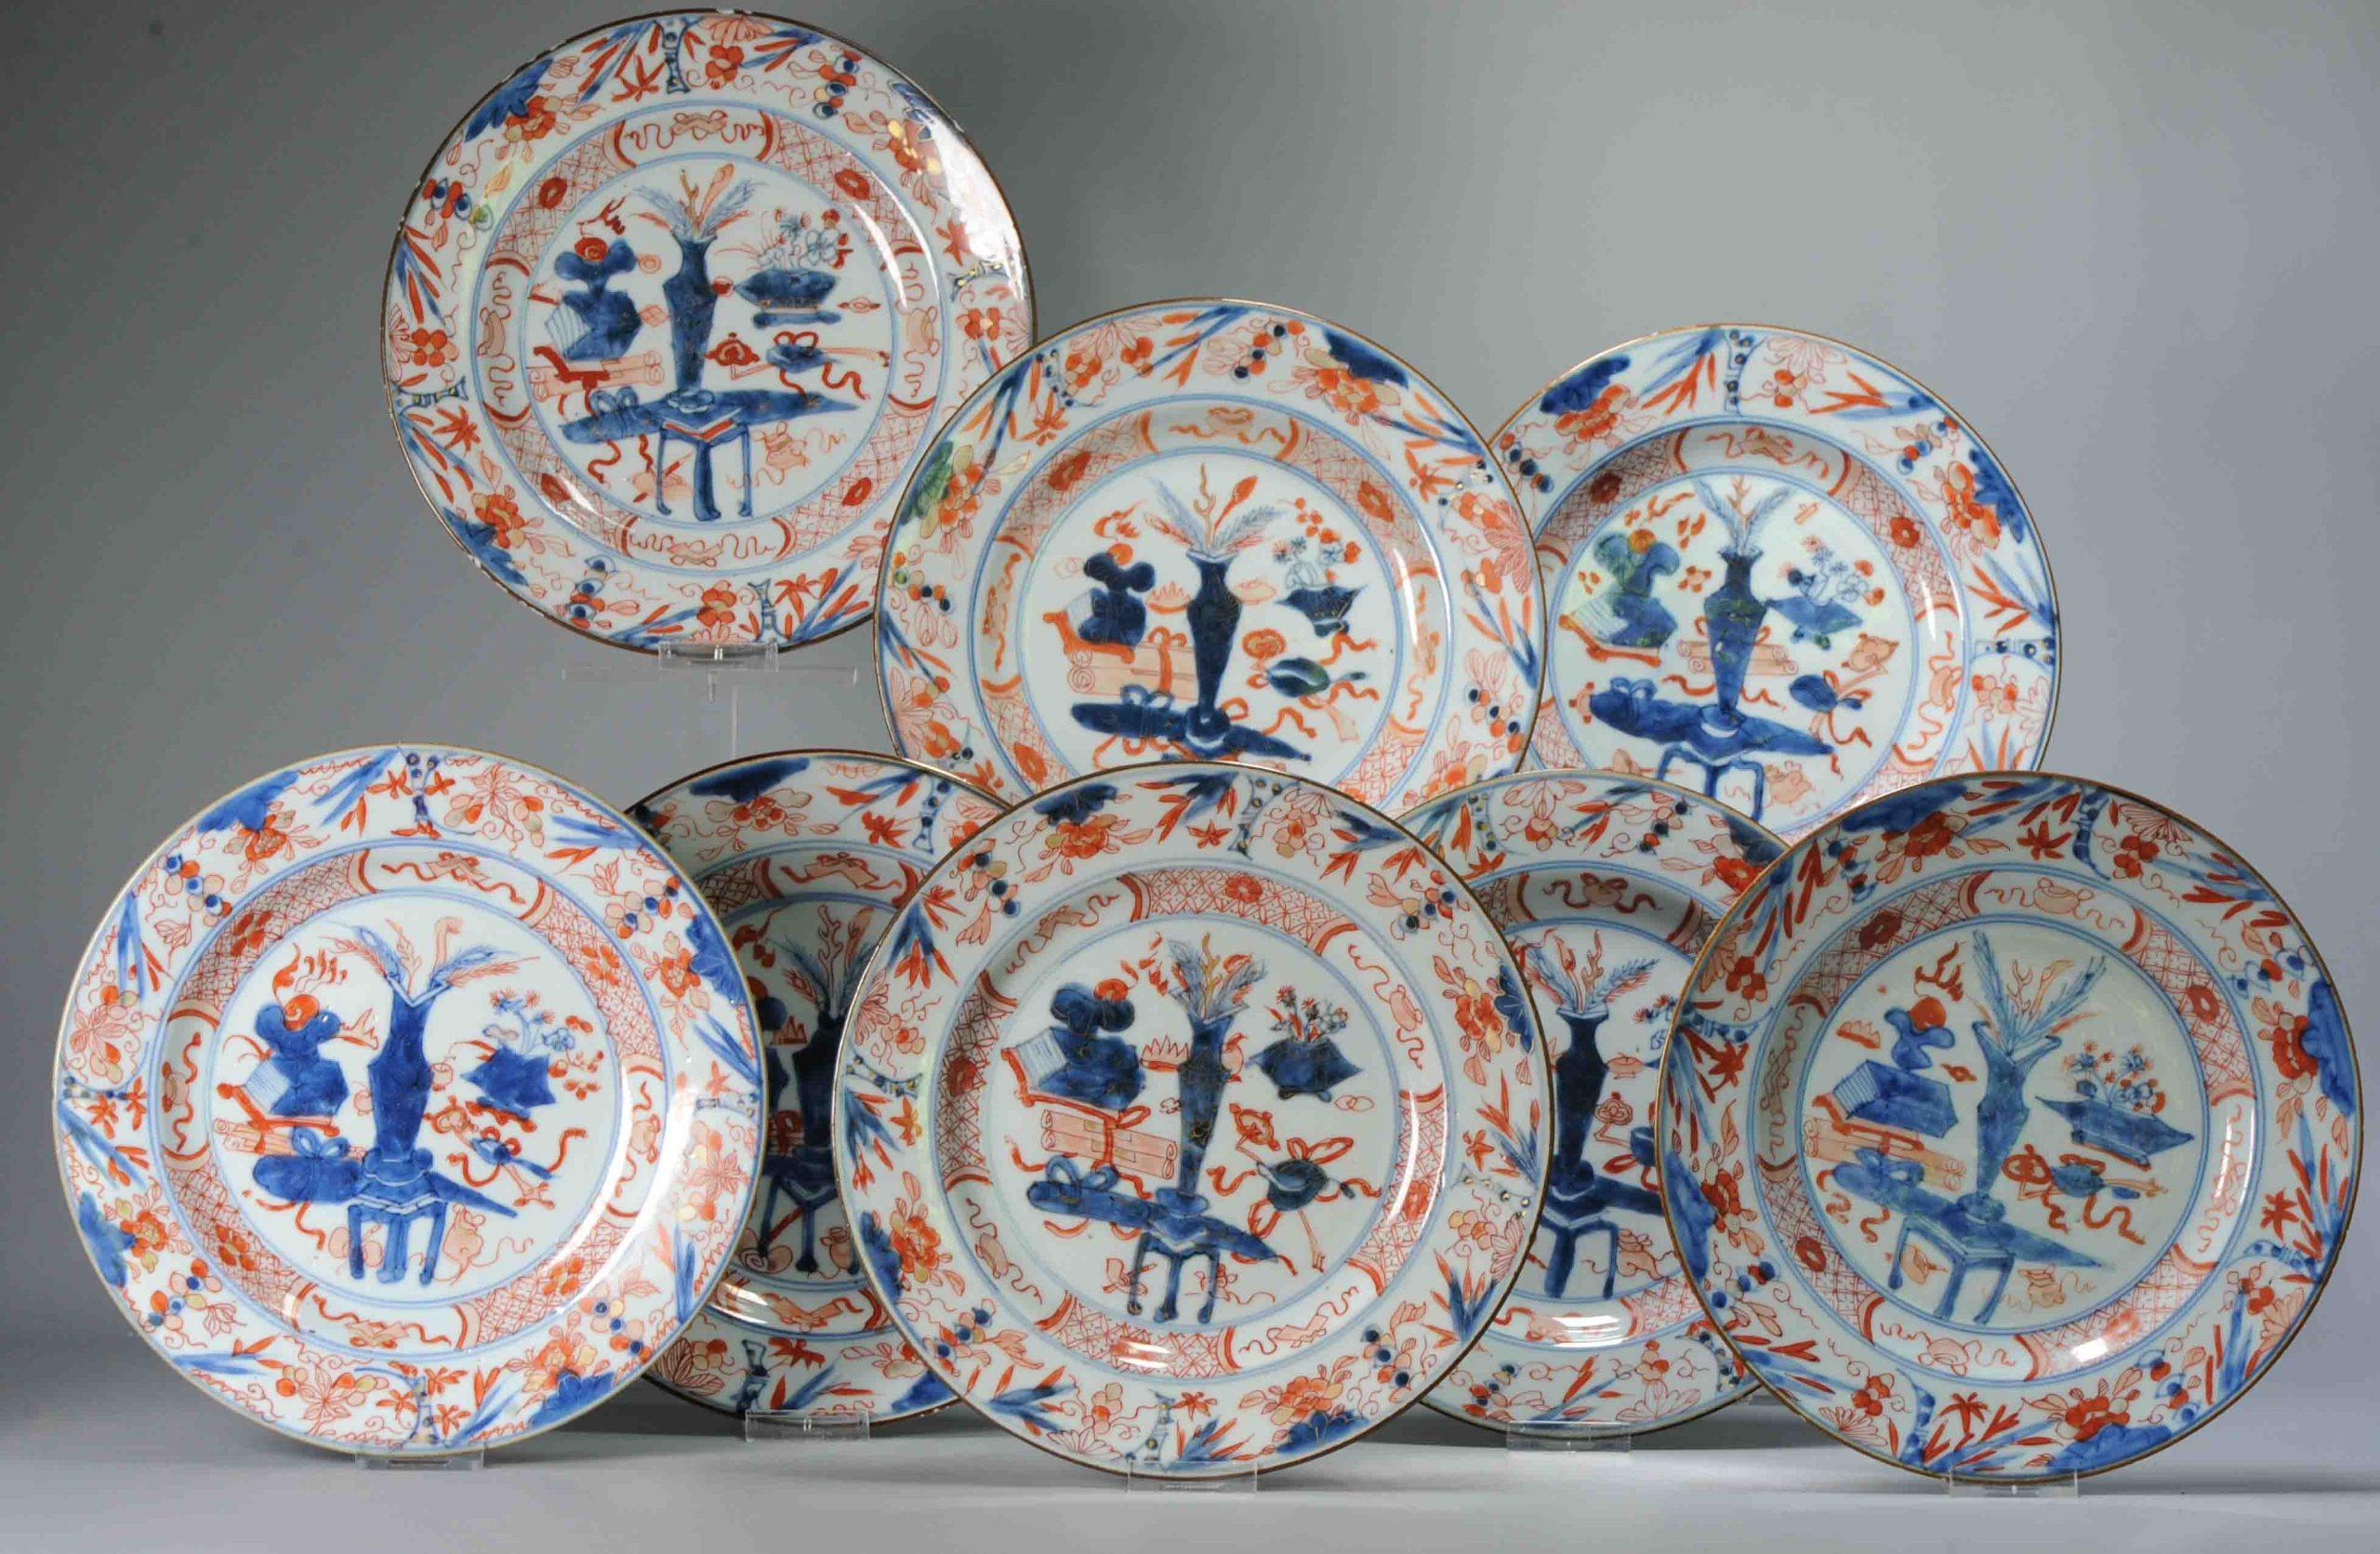 A very nicely decorated set of 8 dishes in Imari palette with a lovely and high quality landscape scene

Condition
1 dish with chip and hairline, rest of dishes with some frits/small chips (some of them very minimal) Size Size 225x26mm Diameter x